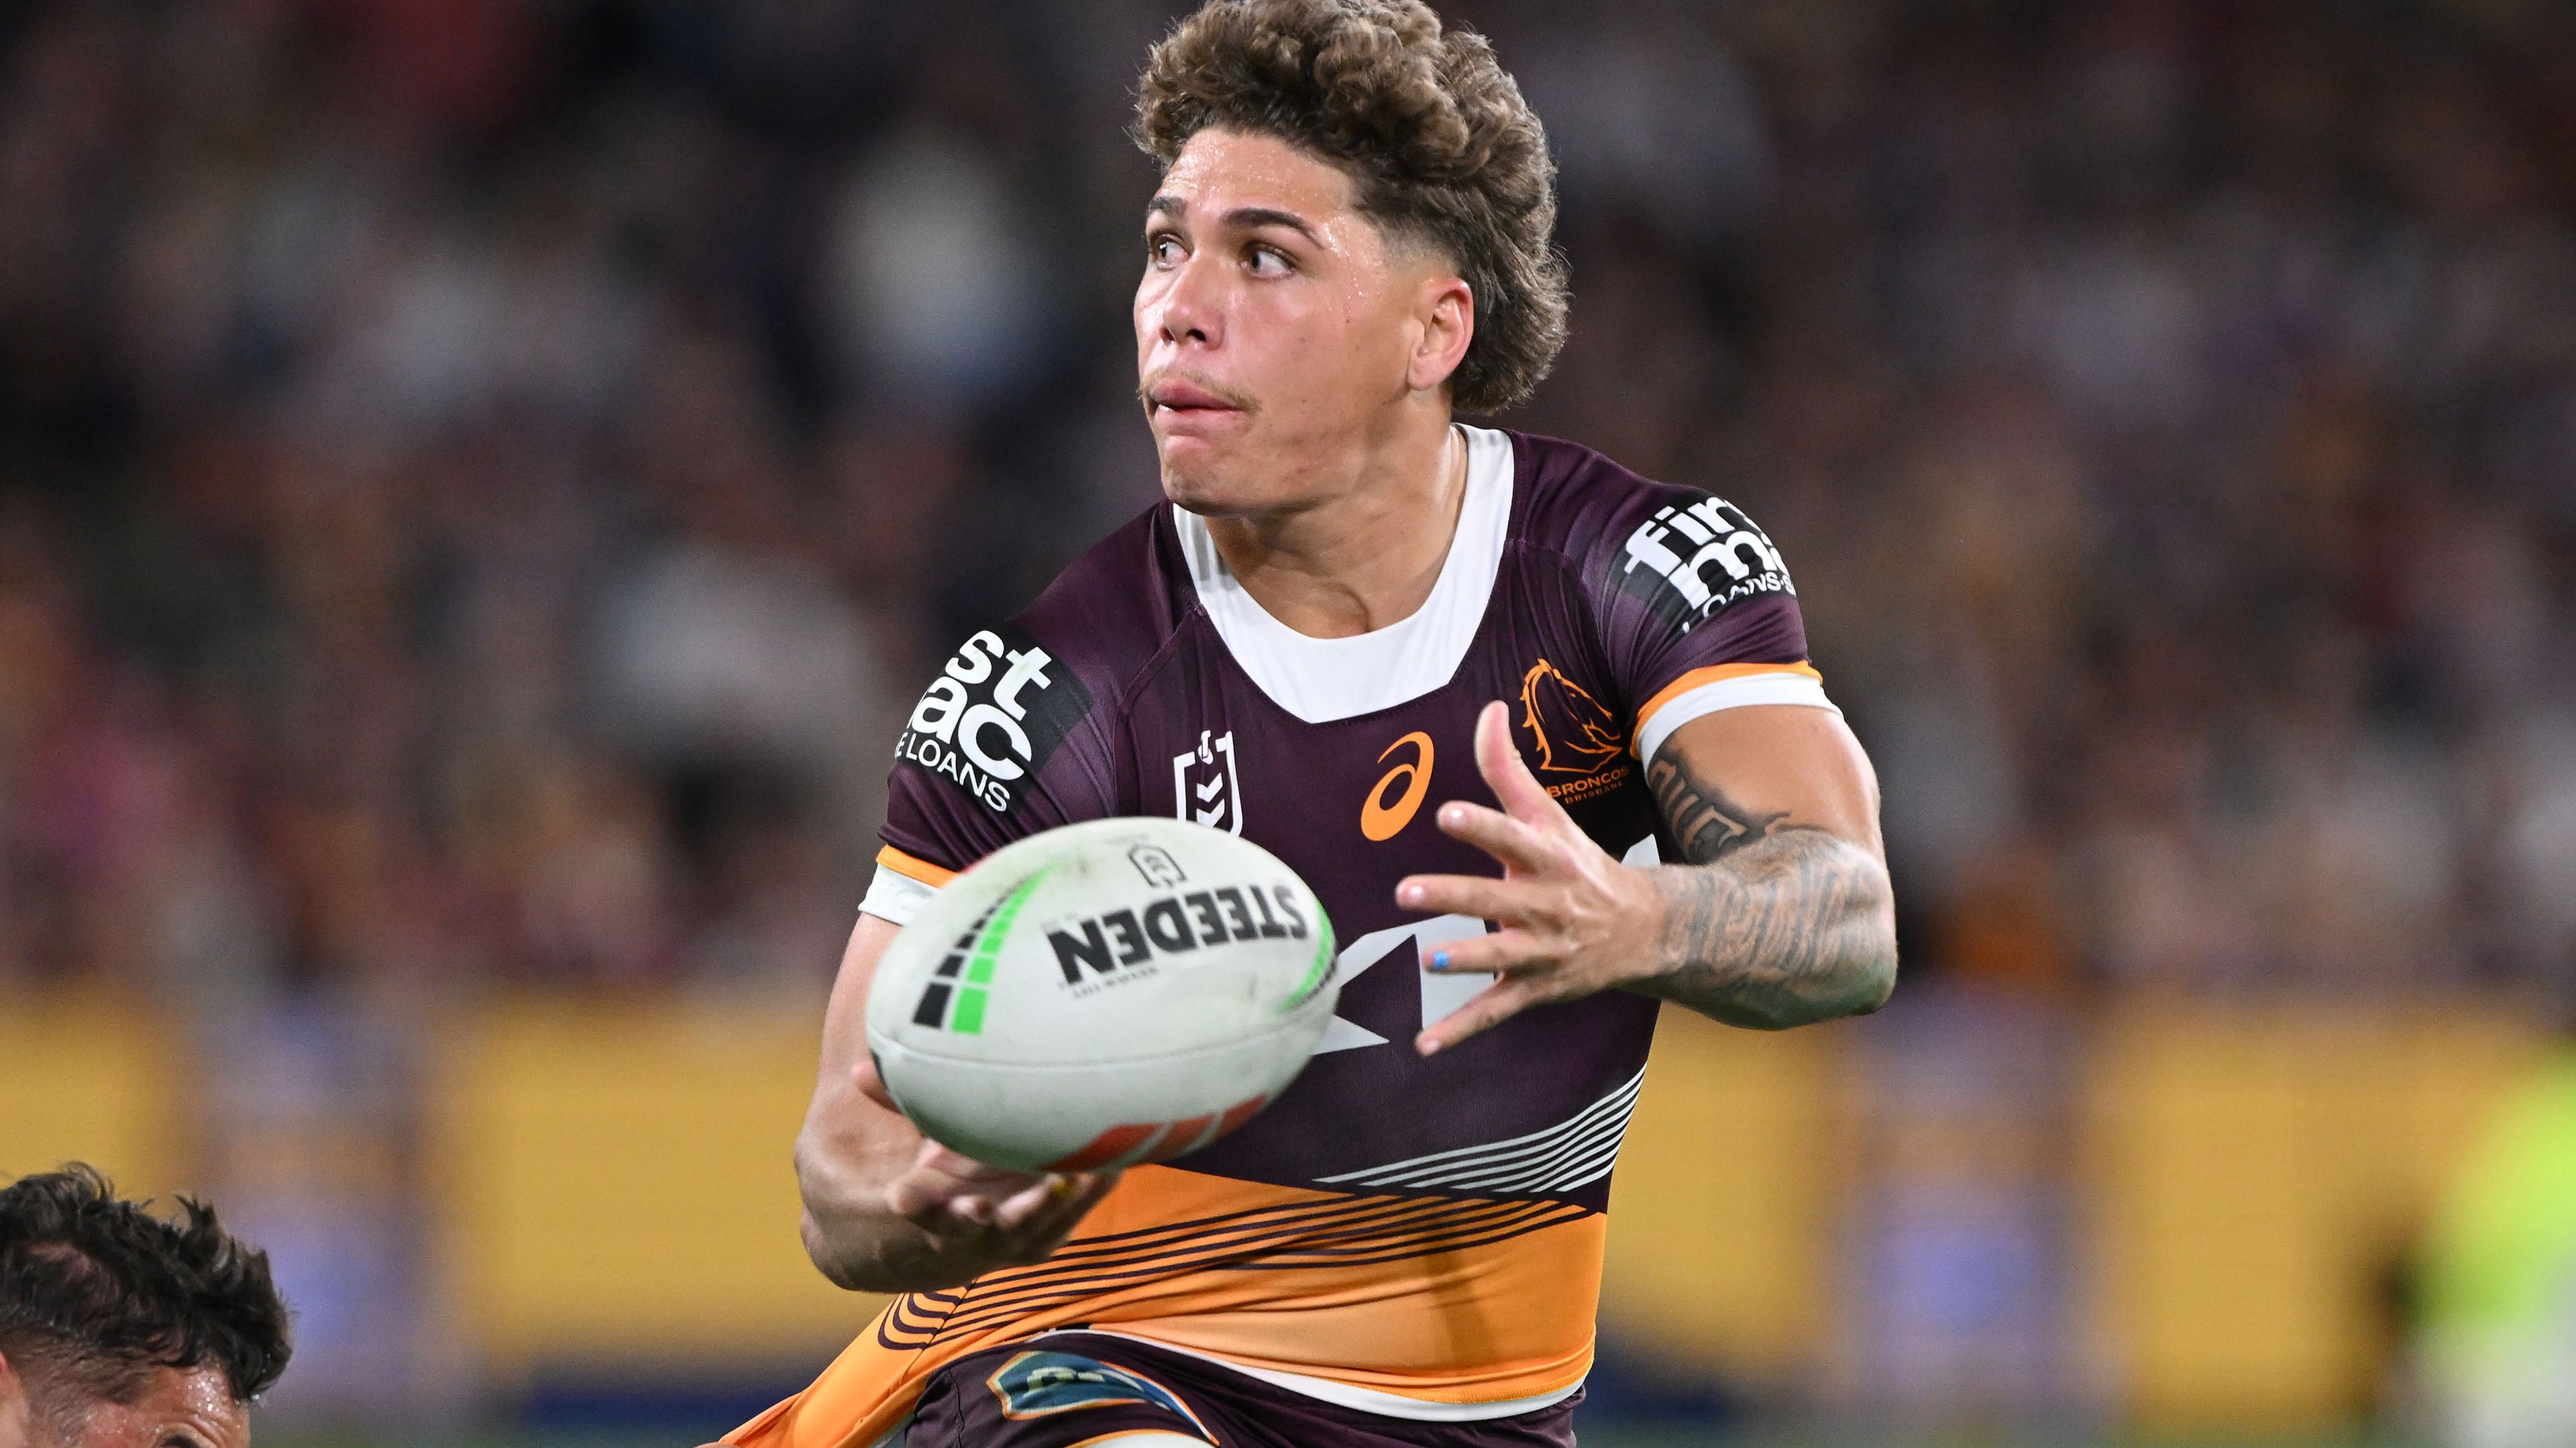 BRISBANE, AUSTRALIA - SEPTEMBER 23: during the NRL Preliminary Final match between the Brisbane Broncos and New Zealand Warriors at Suncorp Stadium on September 23, 2023 in Brisbane, Australia. (Photo by Bradley Kanaris/Getty Images)